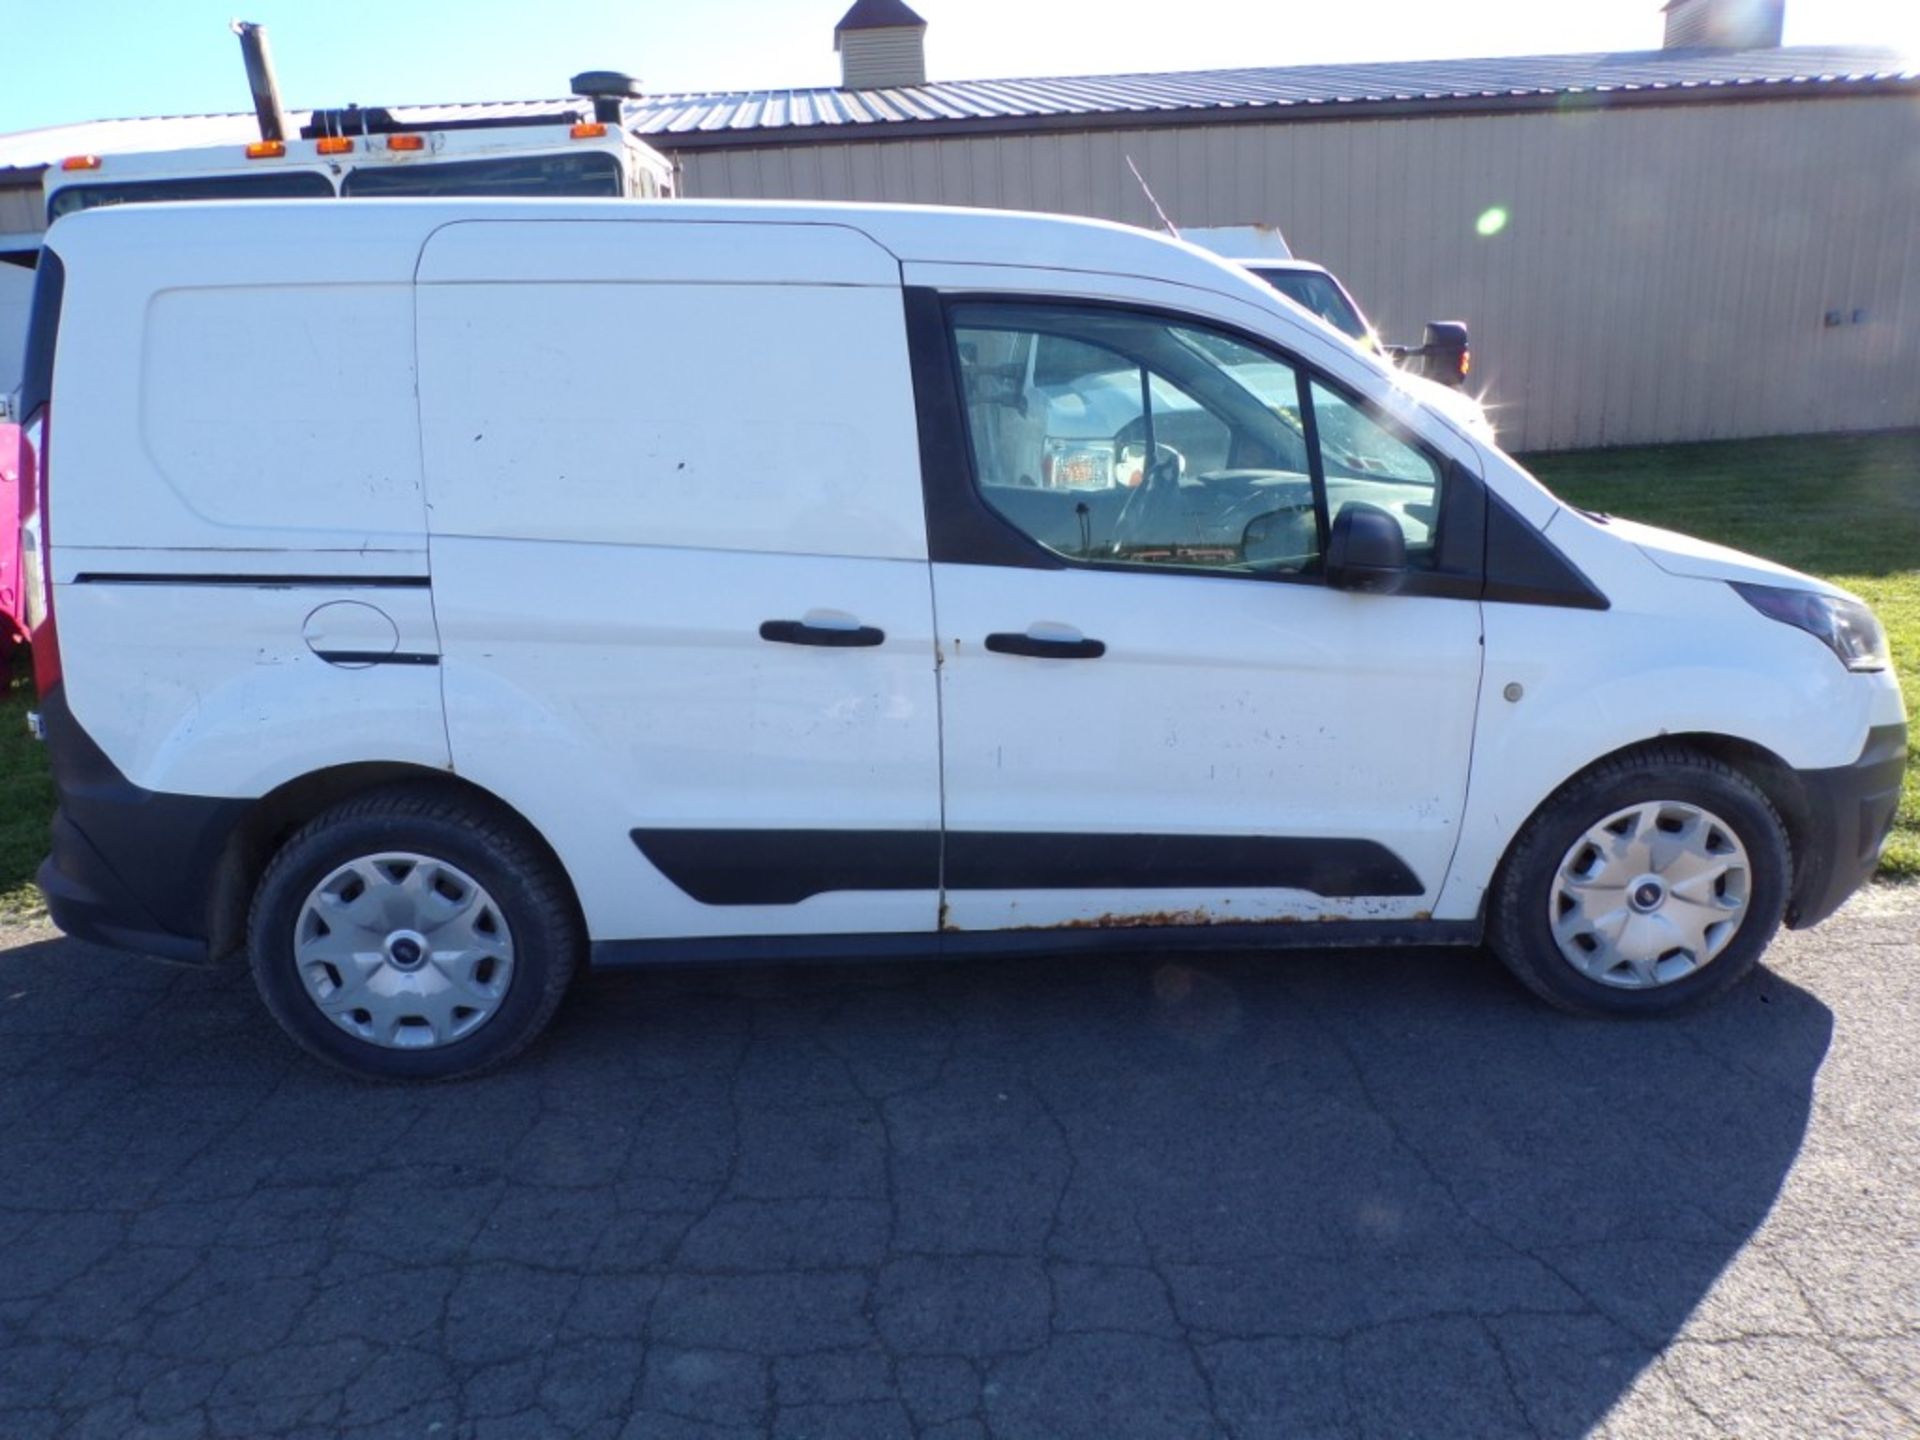 2016 Ford Transit Connect, Auto, White, 208,281 Miles, Vin # NM0LS6E73G1231962 (6561) - HAVE TITLE